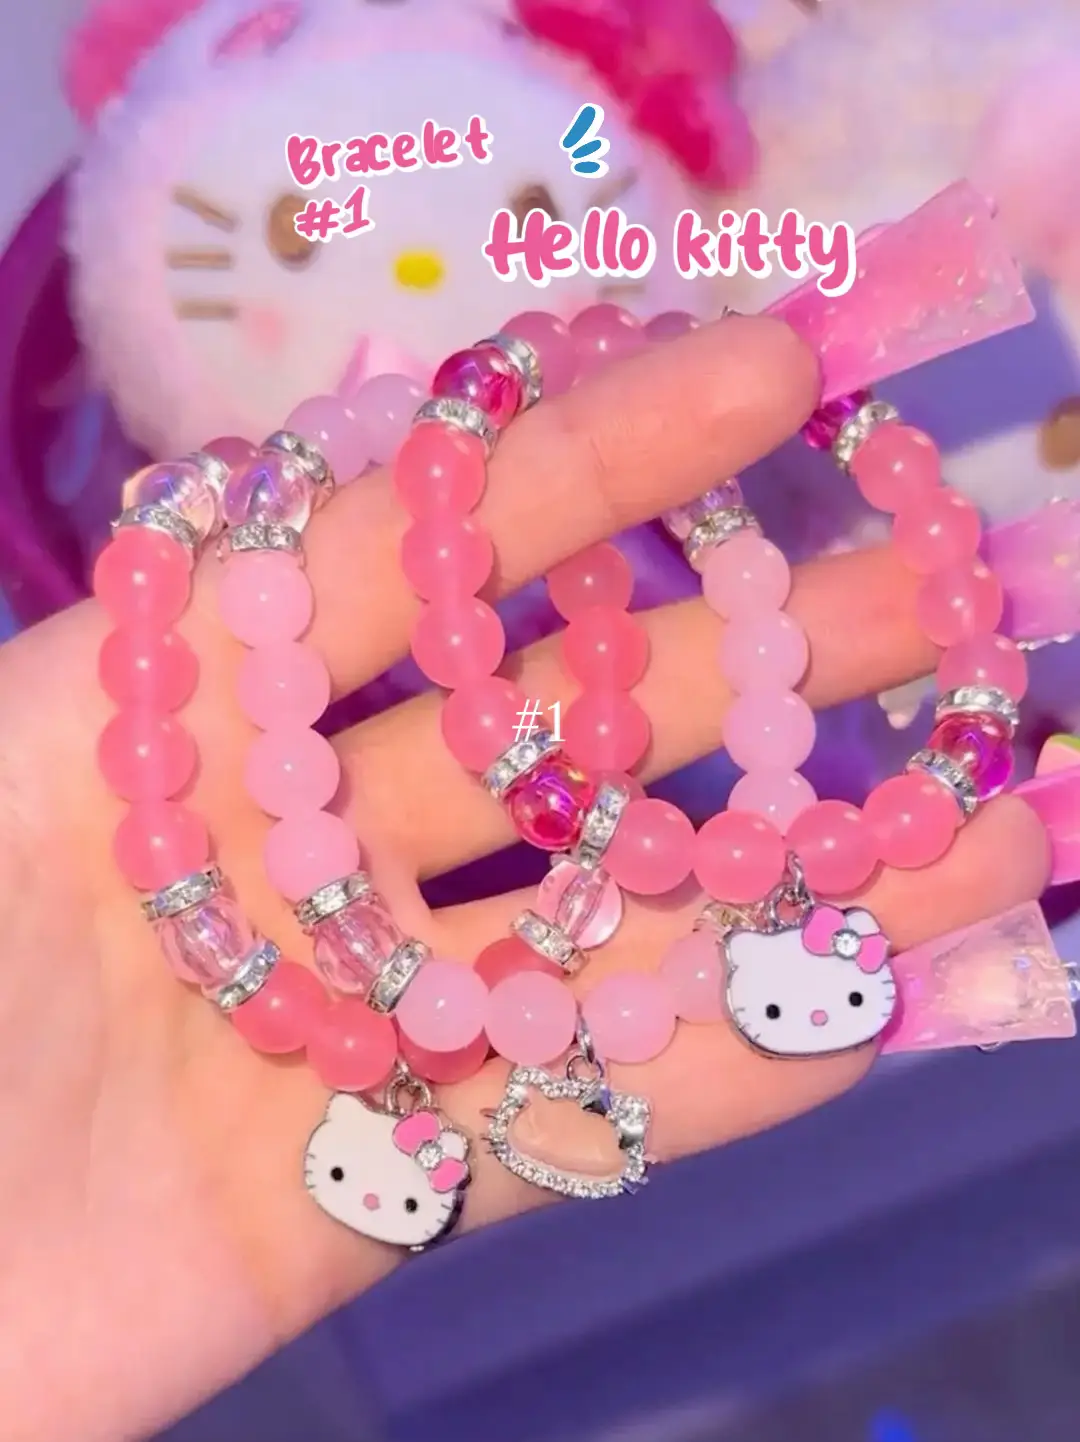 CapCut Hello Kitty and Spider-man matching bracelets is a available i, matching bracelet